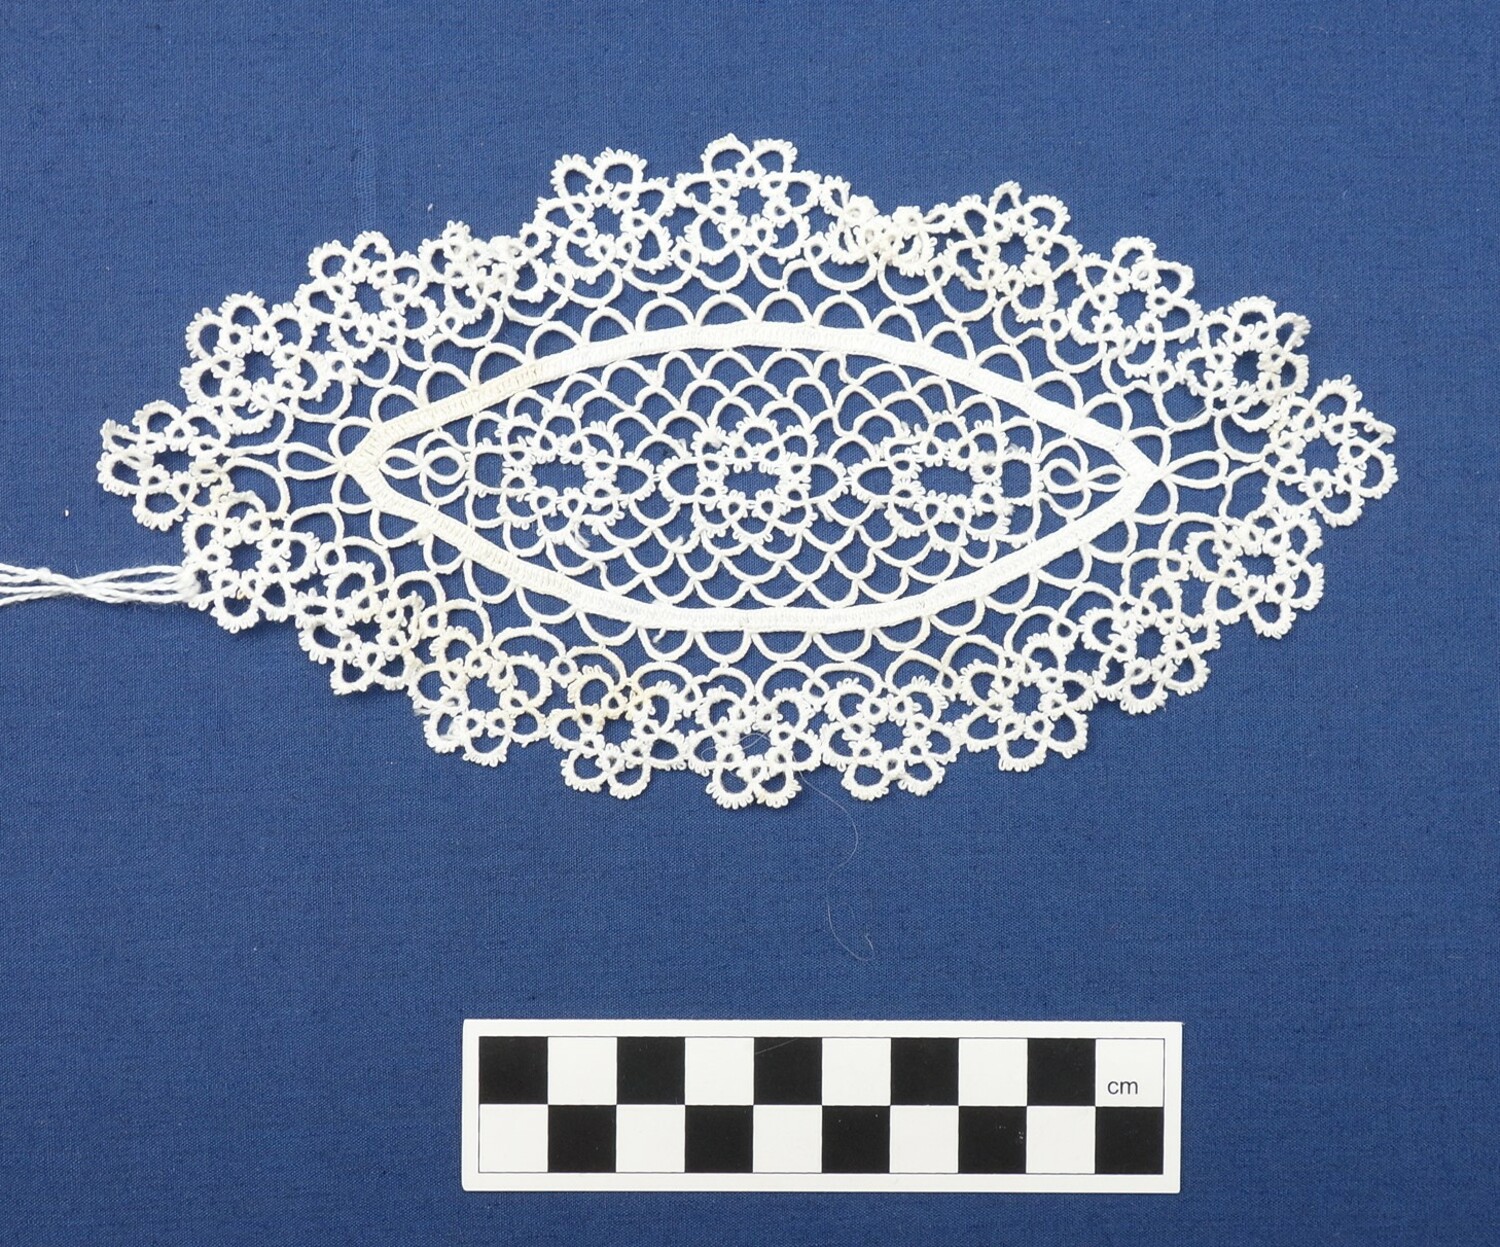 Tatted doily, The Netherlands, early 20th century (TRC 2018.1897).